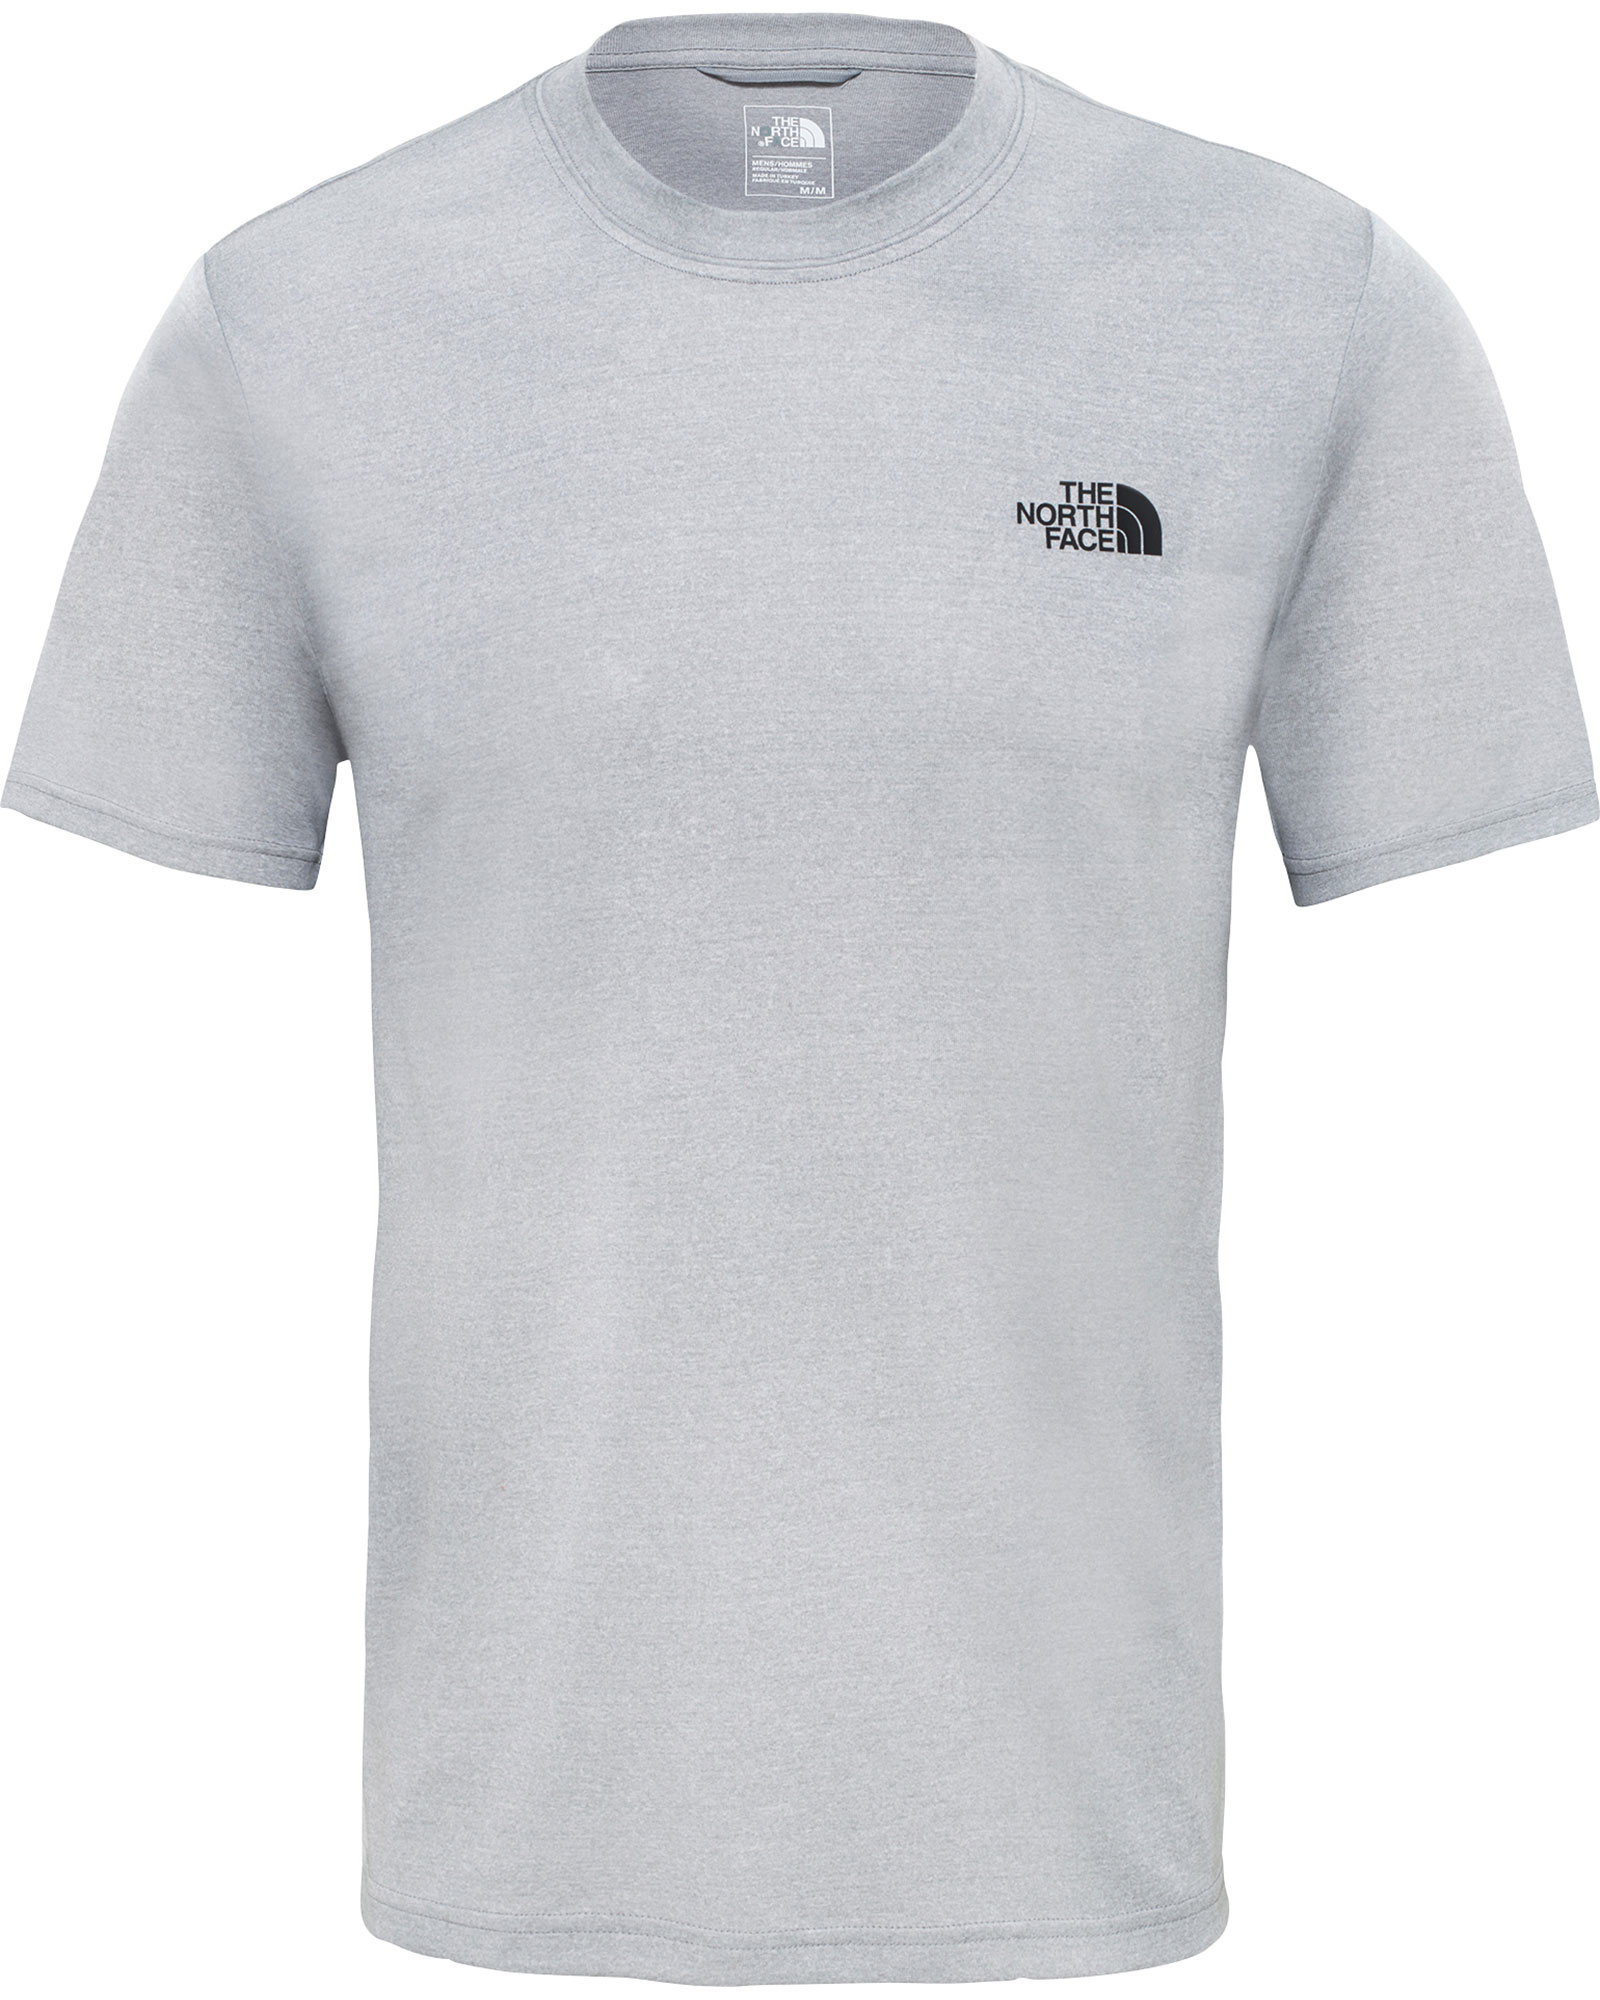 The North Face Reaxion Amp Men’s Crew T Shirt - TNF Light Grey Heather M